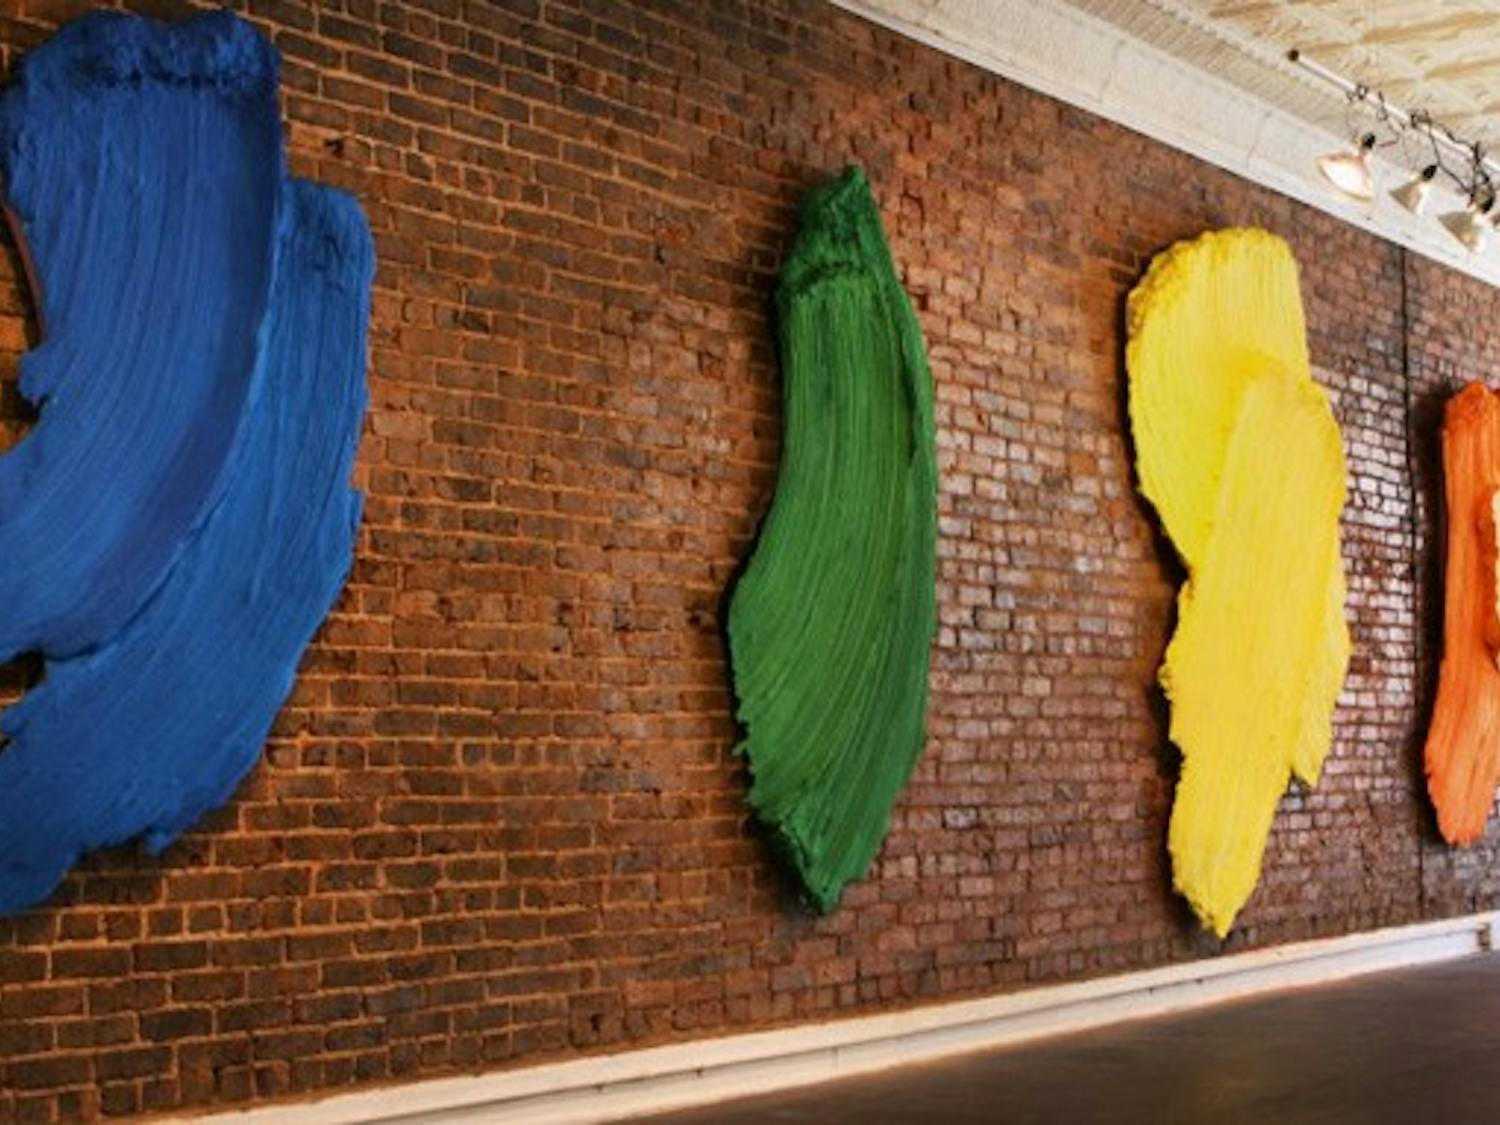 Artist Donald Martiny&#039;s paintings, made with nanotechnology, micro bubbles and brooms, are displayed at the Carrack Modern Art gallery. The exhibition will run through November 5.